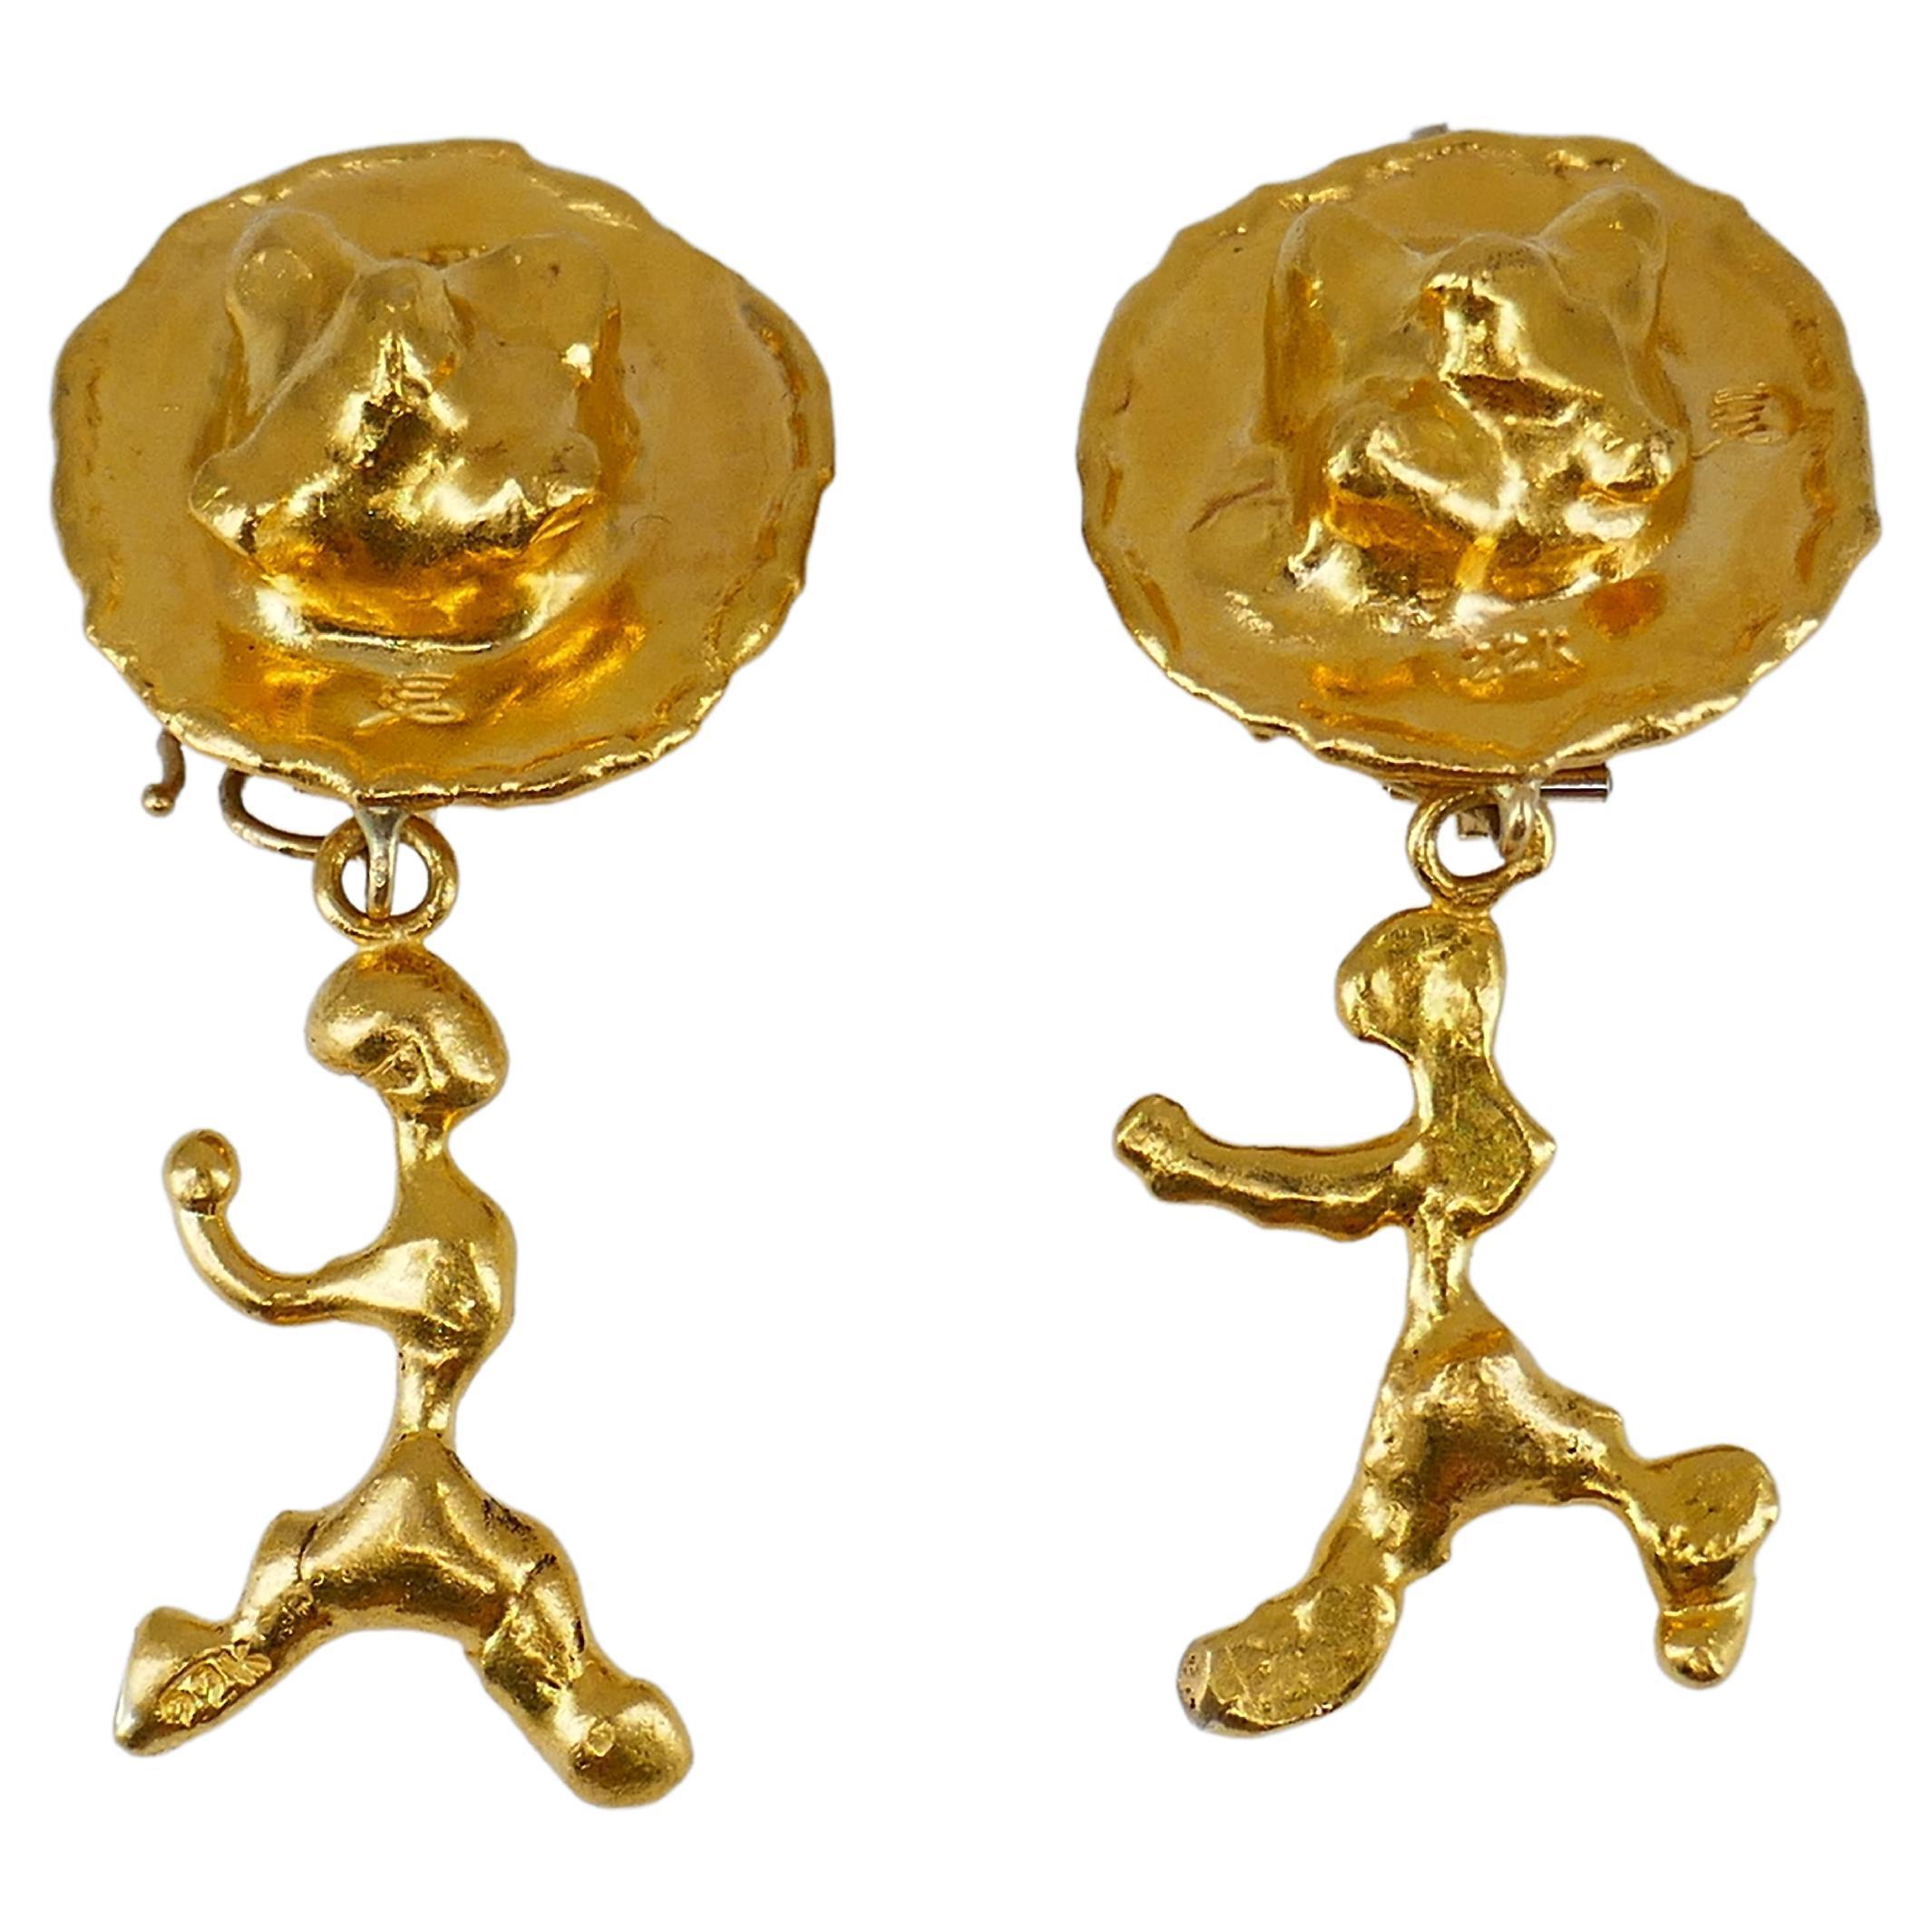 A pair of convertible Jean Mahie earrings made of 22k gold.
The earrings of abstract design comprises two parts: a clip-on circle earring and a dangling figure. The latter can be worn as a charm or pendant. 
These sculptural Mahie earrings with its